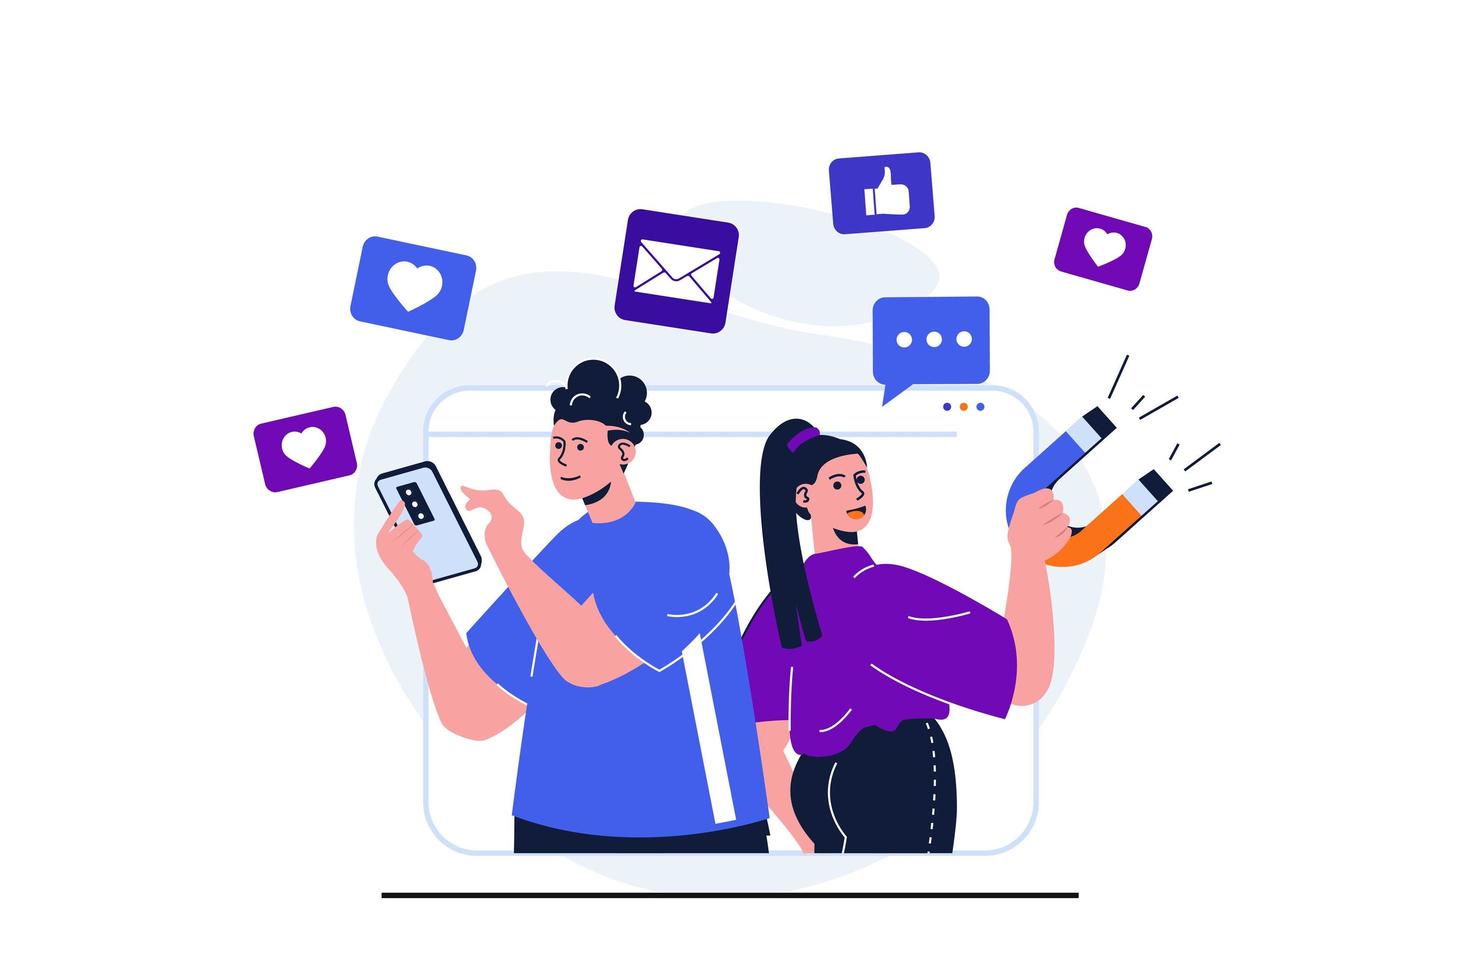 Social media marketing modern flat concept for web banner design. Man makes advertising posts in mobile app, woman with magnet attracts new customers. Vector illustration with isolated people scene